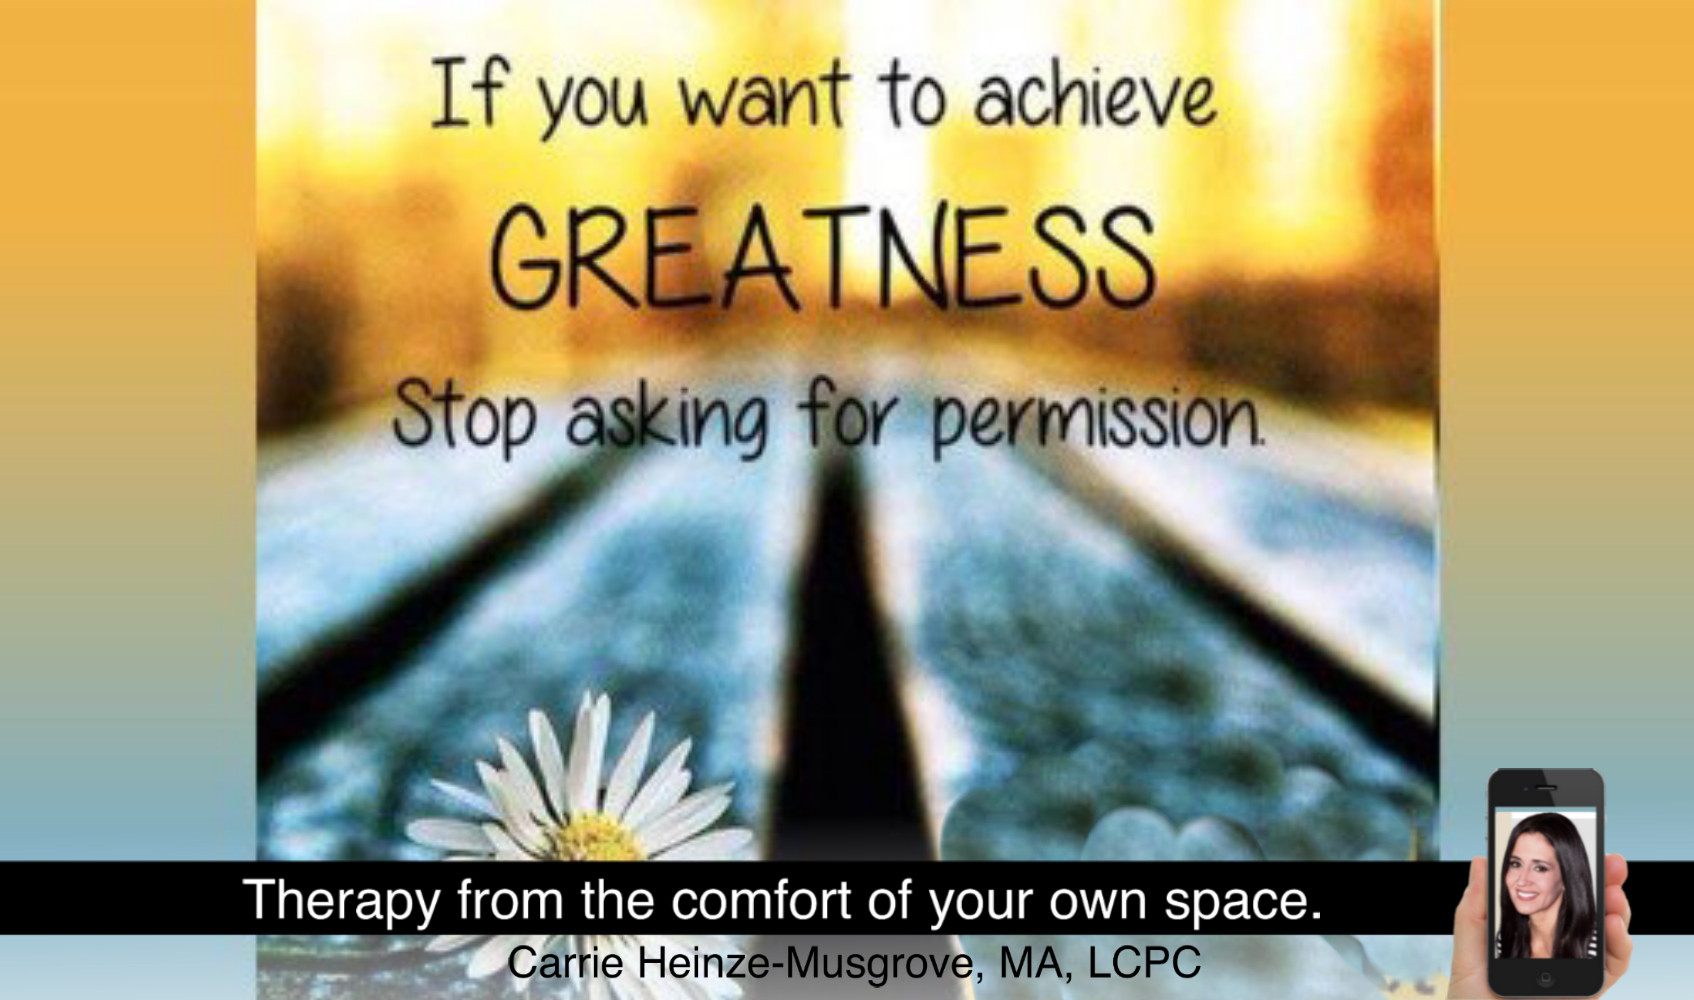 A big step we can take towards greatness is to stop asking permission.